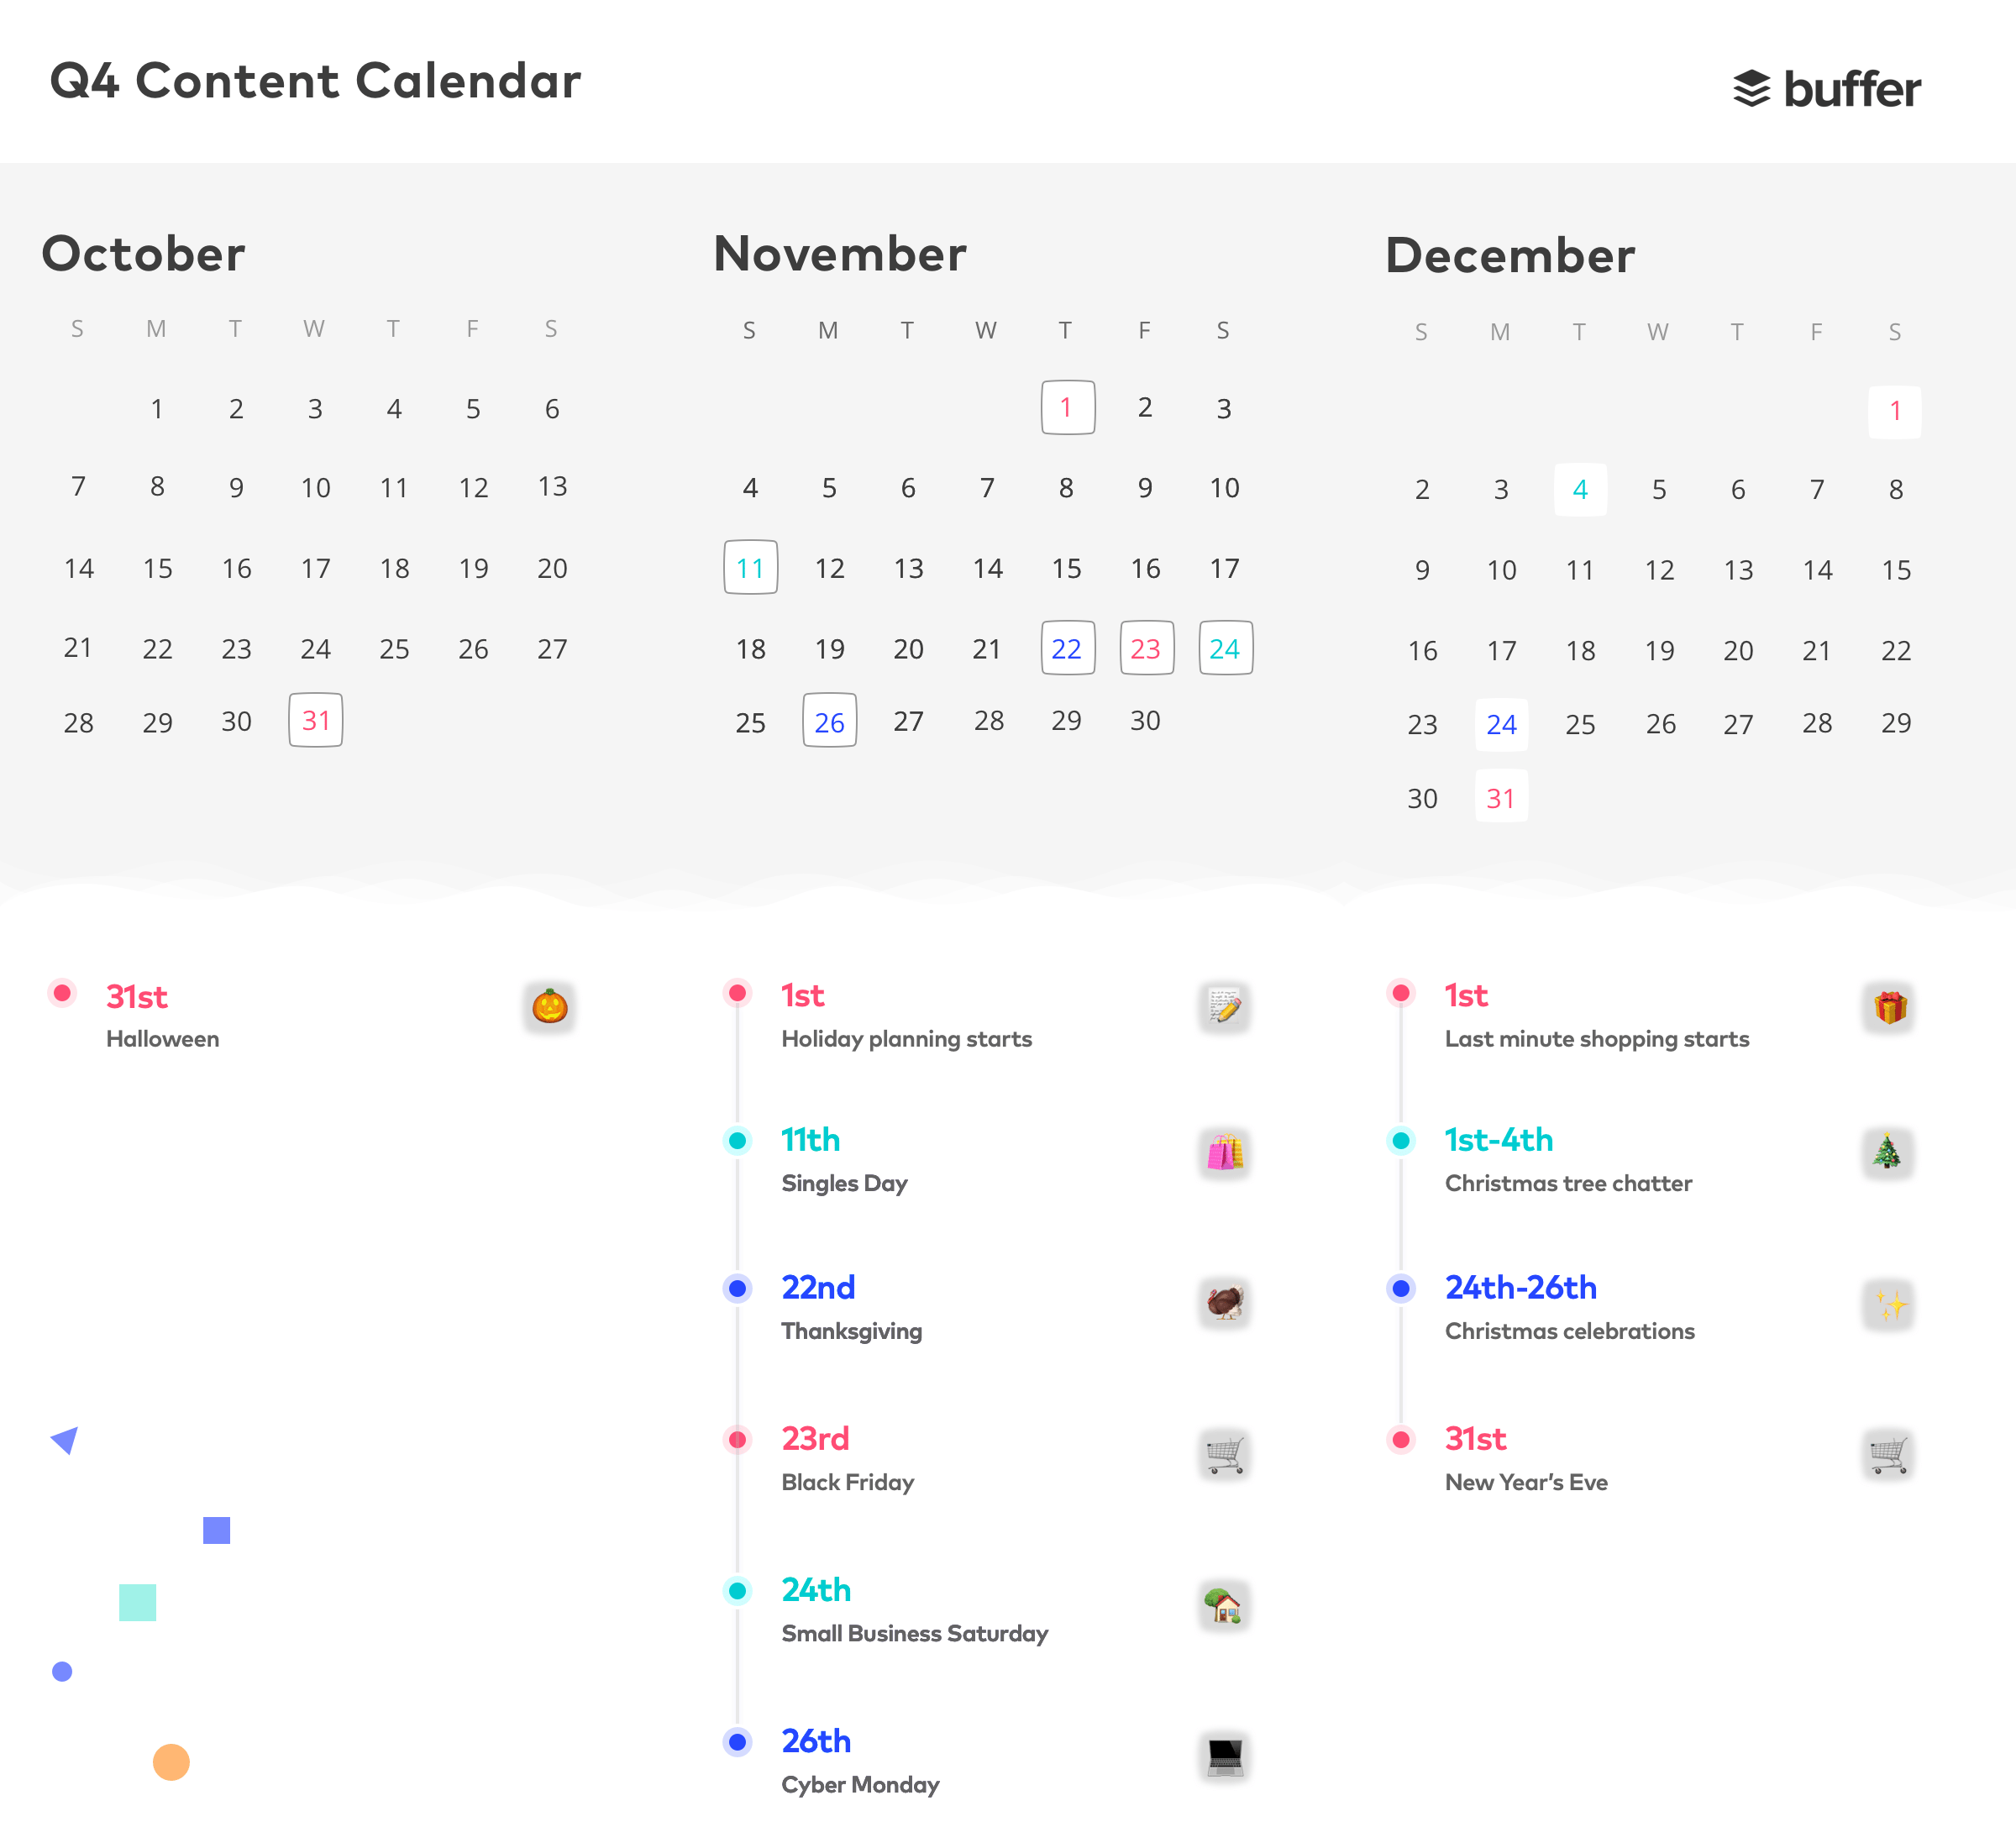 Q4 Content Calendar Important Dates and Campaign Ideas for Small